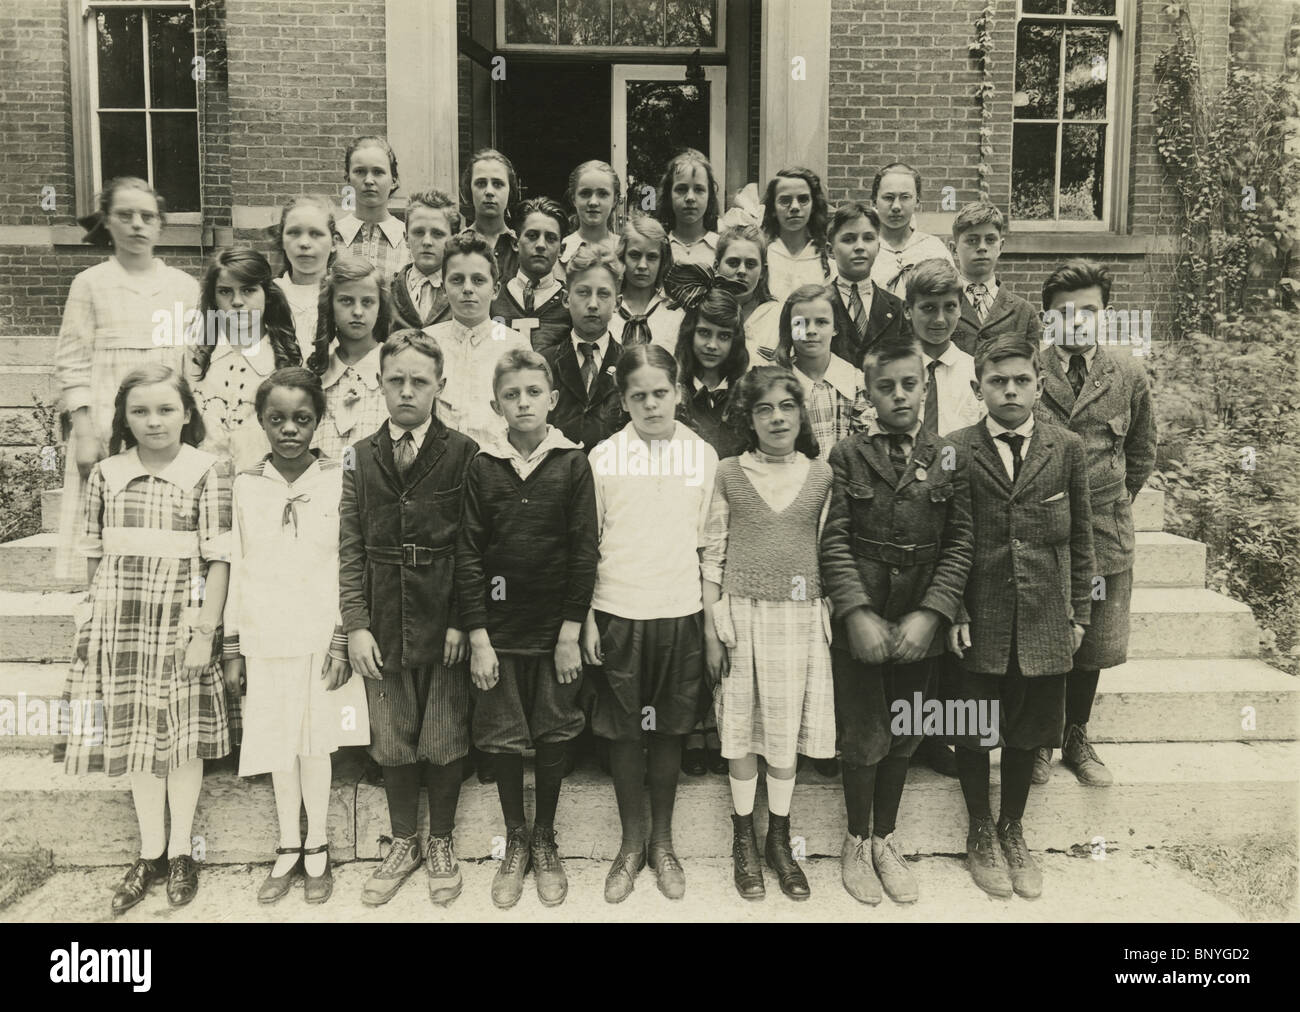 Circa 1900 school photo, showing a group of caucasian 9-11 years old with an African American girl. Stock Photo